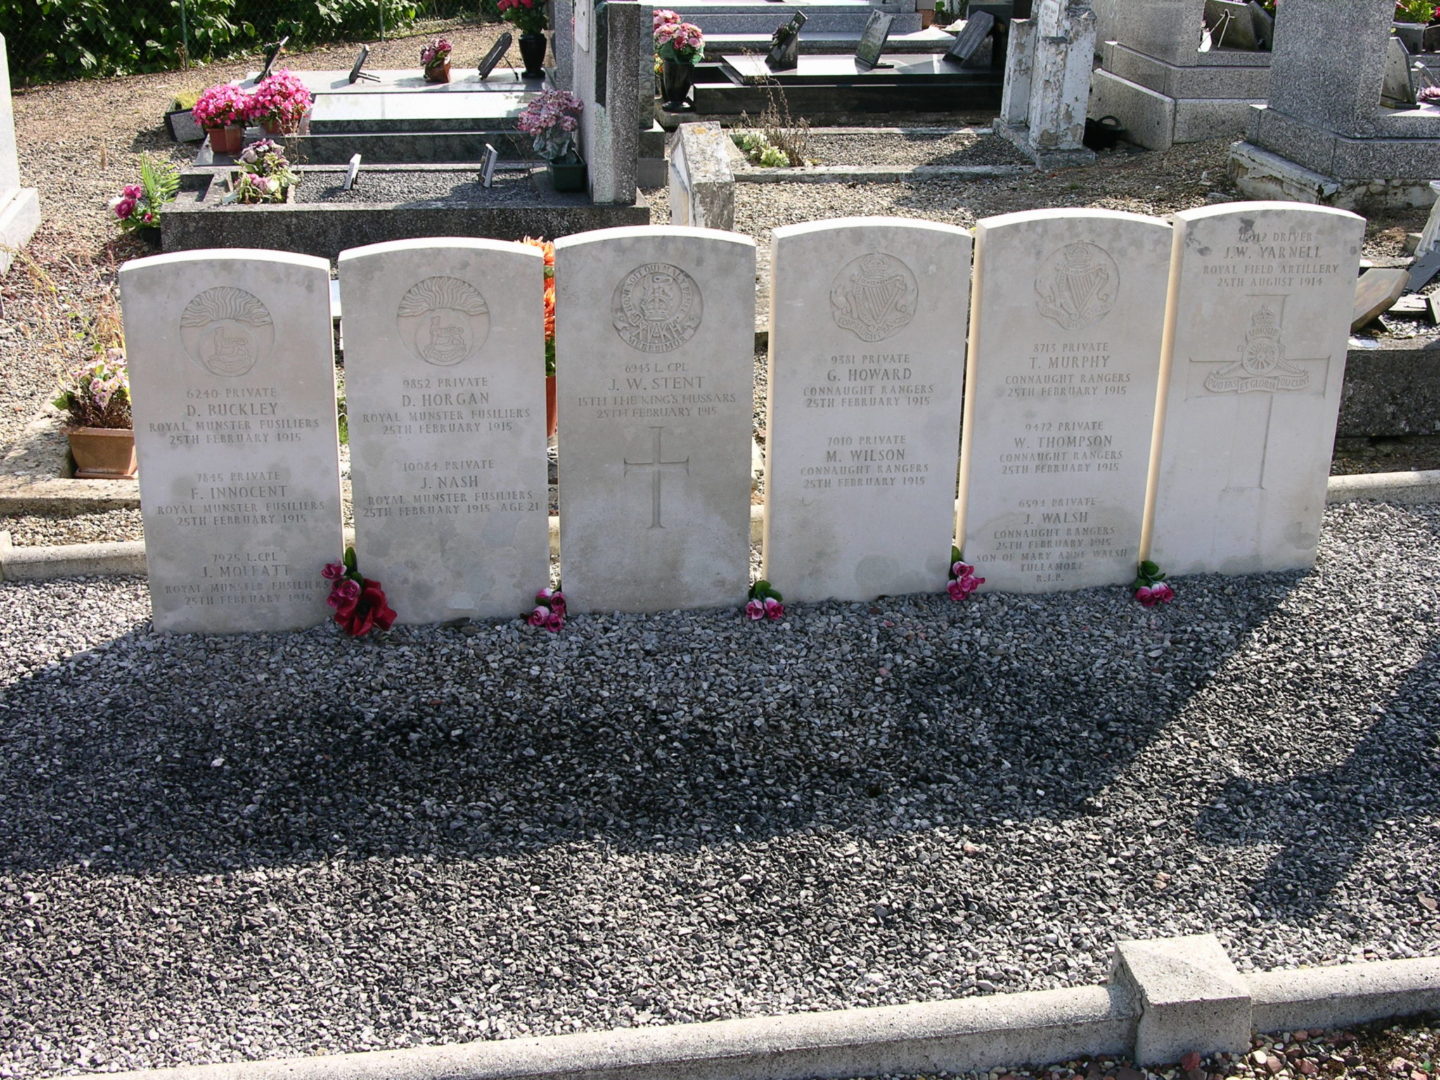 The soldiers’ Commonwealth War Graves